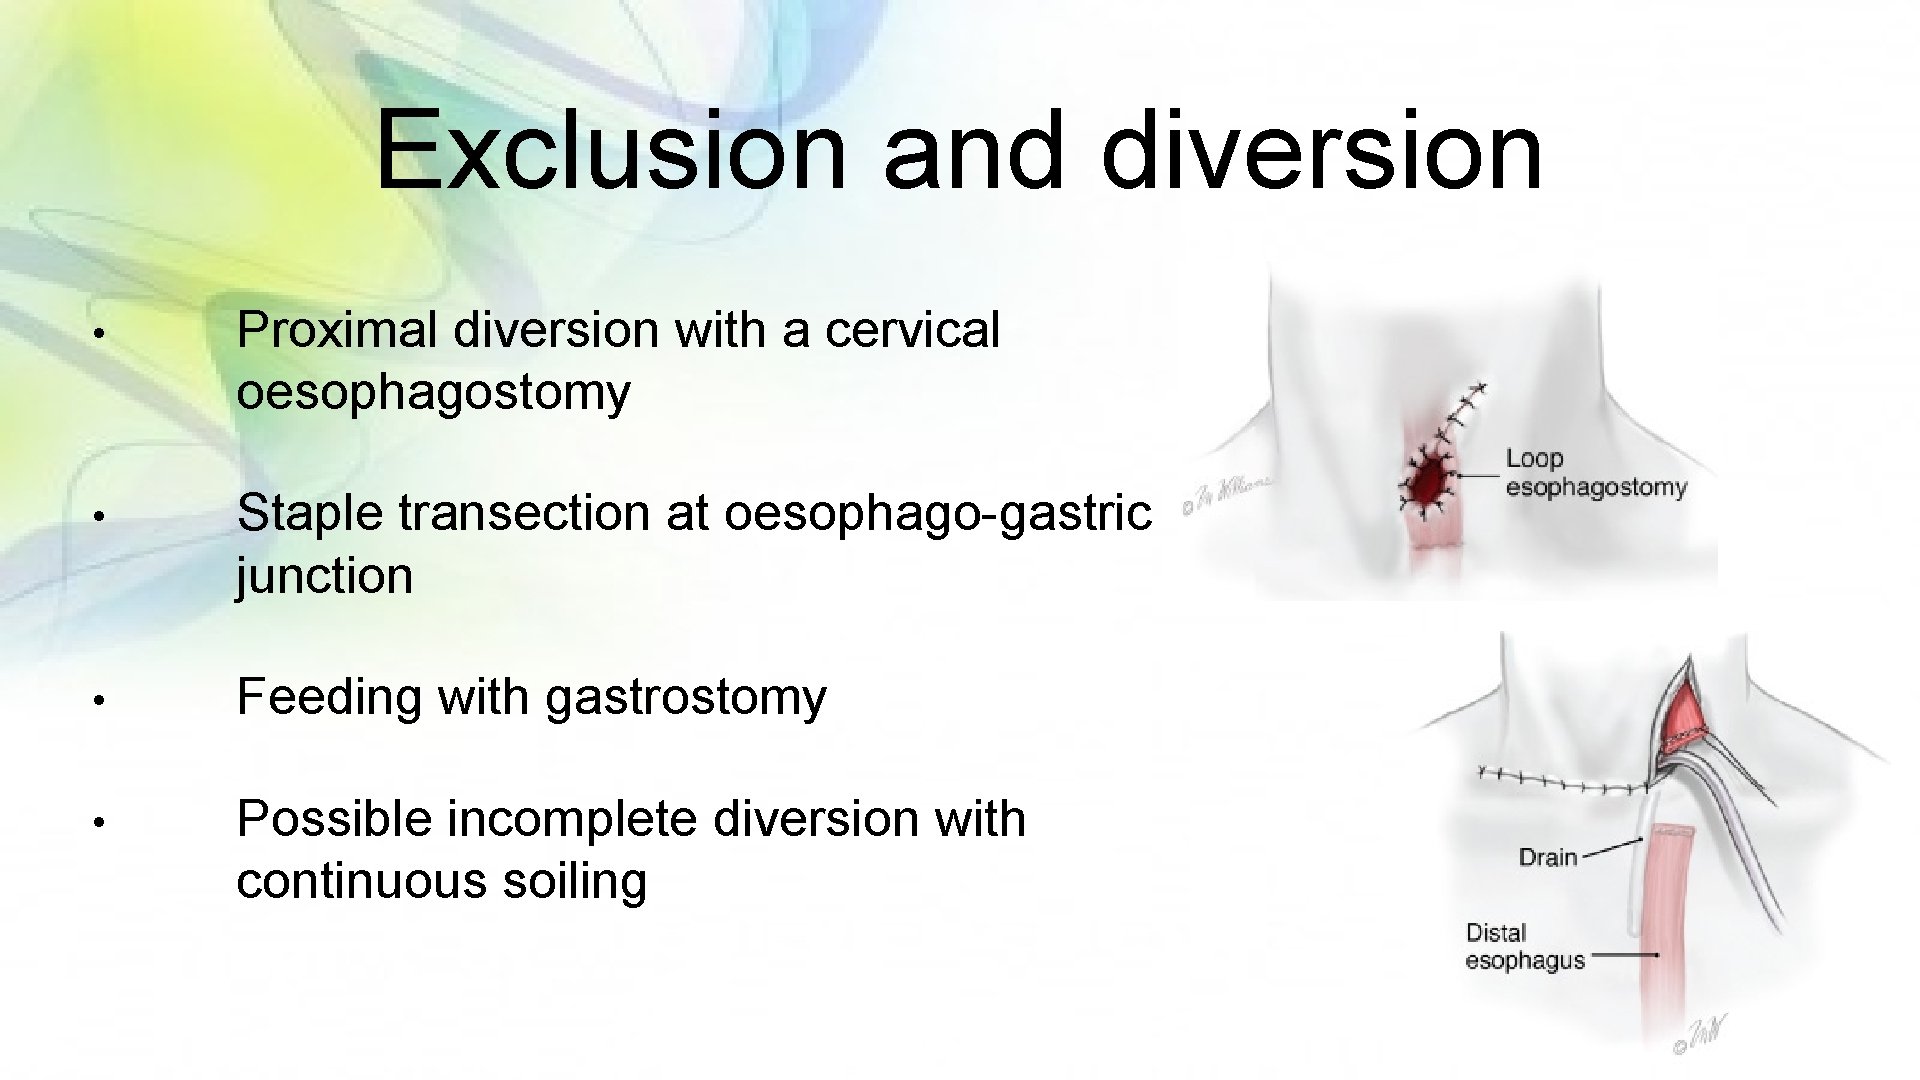 Exclusion and diversion • Proximal diversion with a cervical oesophagostomy • Staple transection at